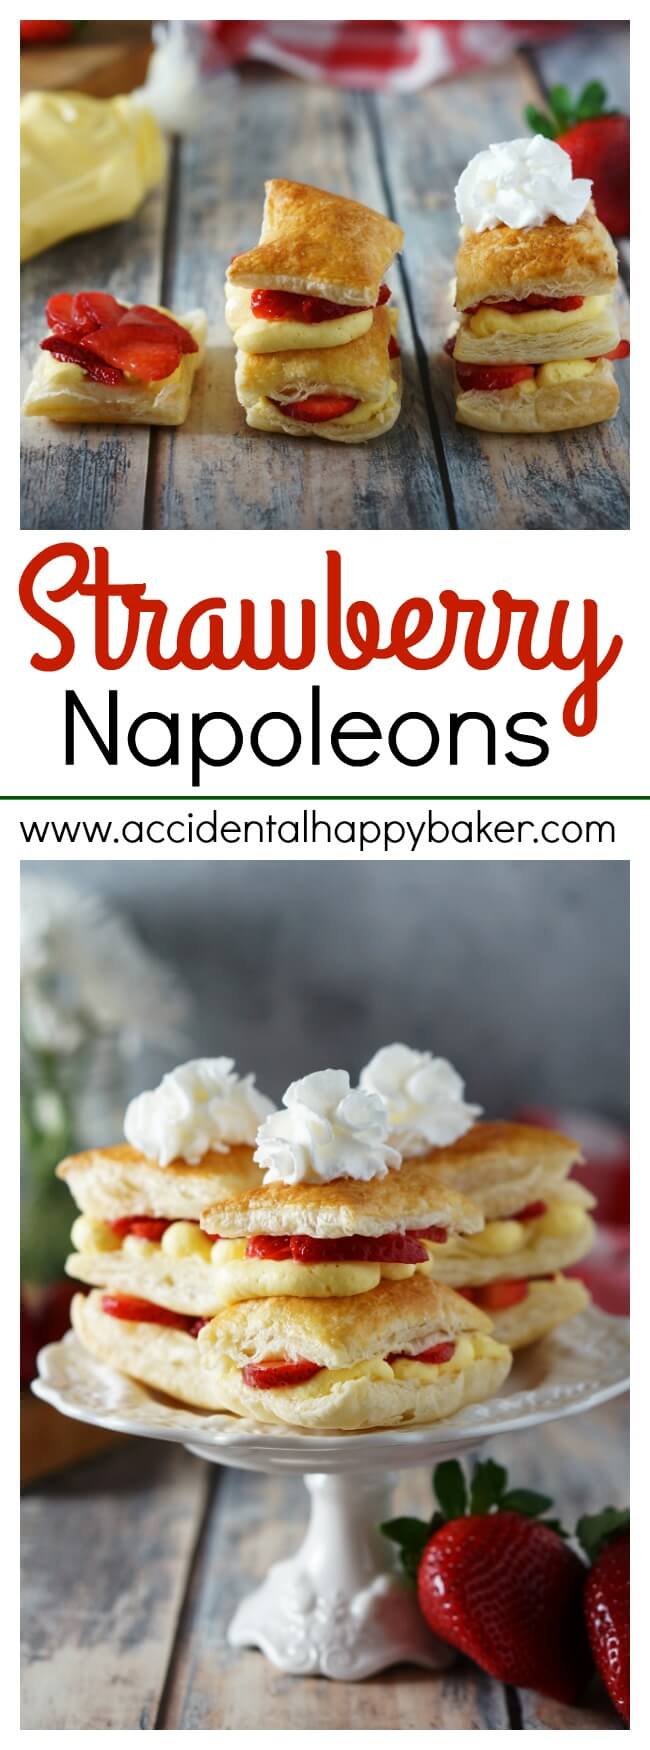 Light and fresh, but oh so indulgent, strawberry napoleons start with flaky puff pastry layered with fresh strawberries and Bavarian cream, topped off with a perfect swirl of whipped cream. Ready in 30 minutes. Recipe on www.accidentalhappybaker.com @AHBamy